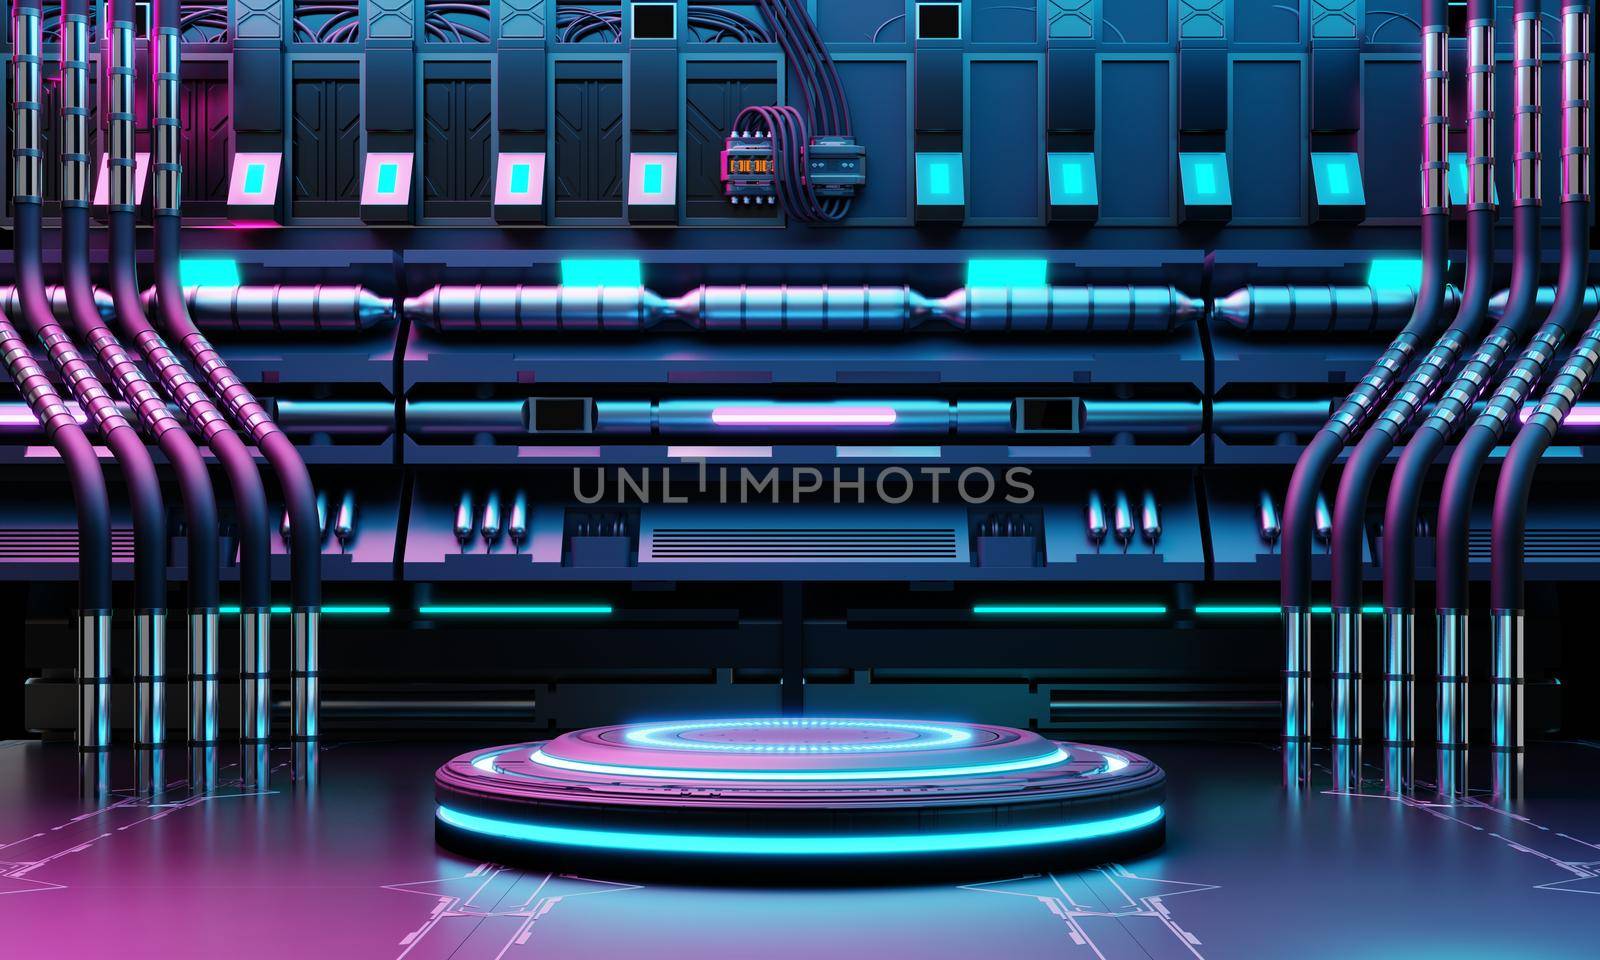 Cyberpunk sci-fi product podium showcase in spaceship base with blue and pink background. Technology and object concept. 3D illustration rendering by MiniStocker